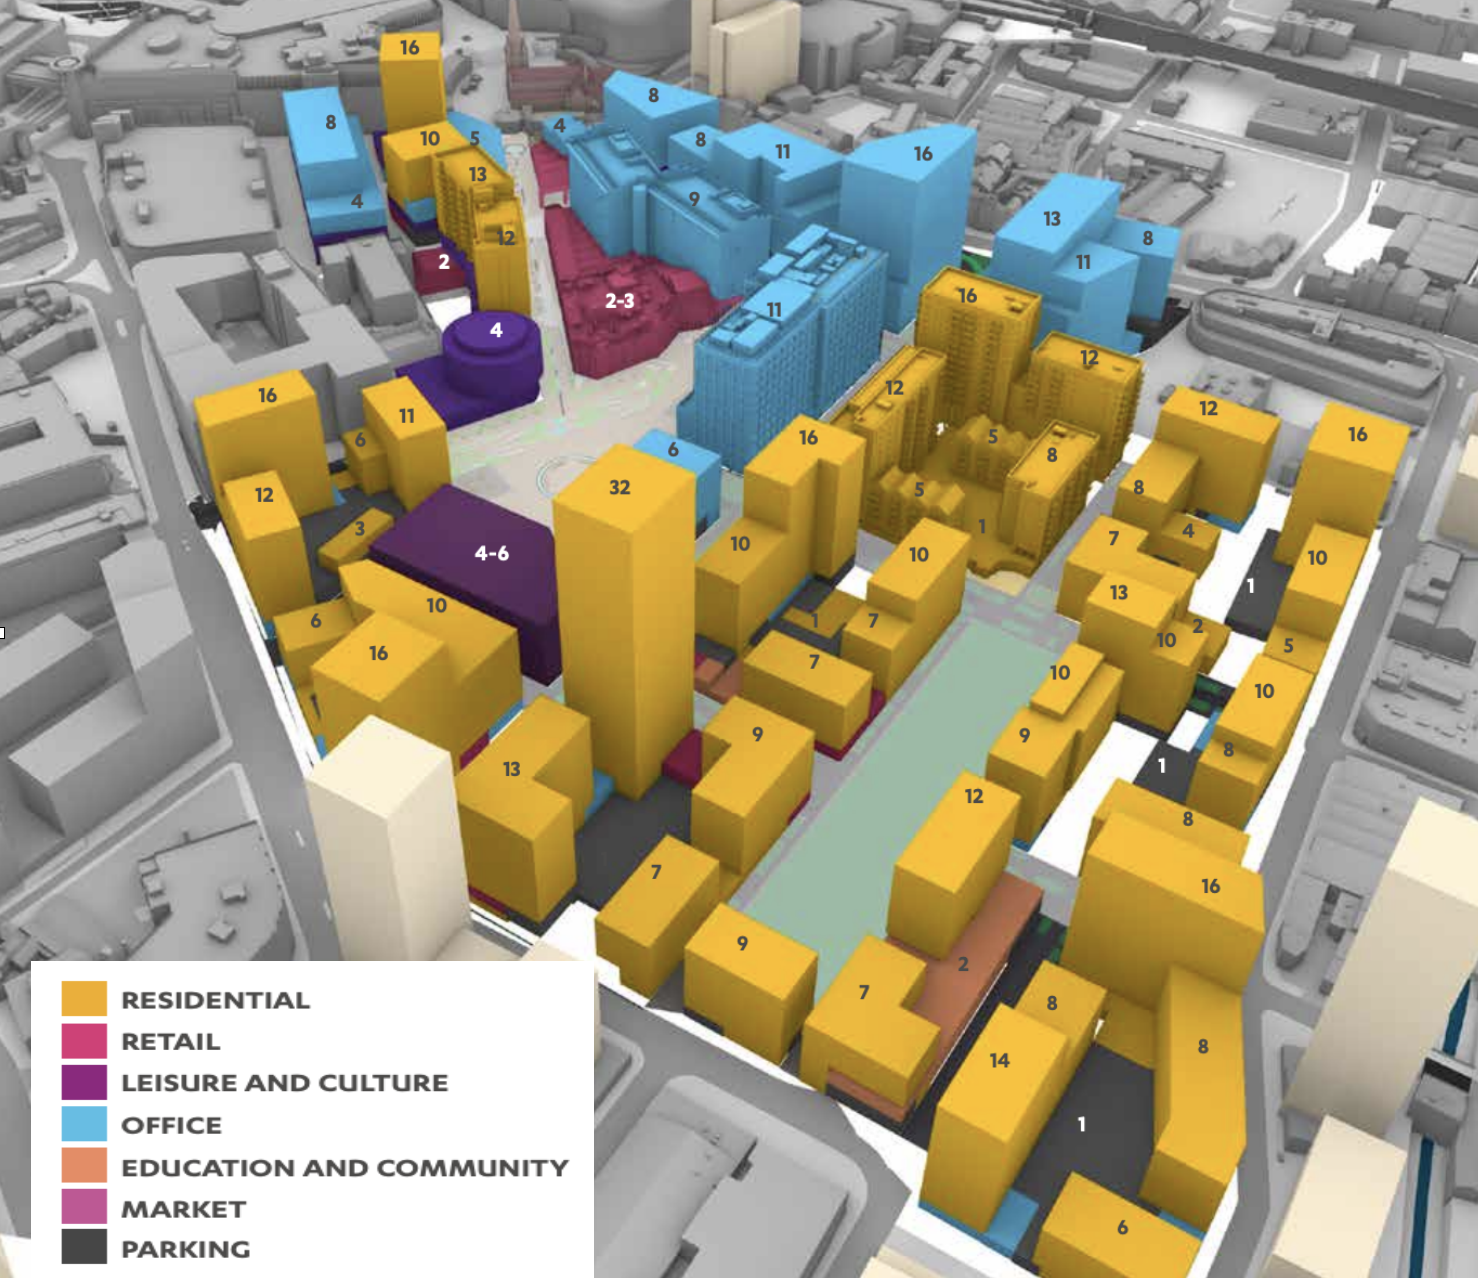 Plans for the Smithfield site between New Street Station and Digbeth - Birmingham office market Q1 2023